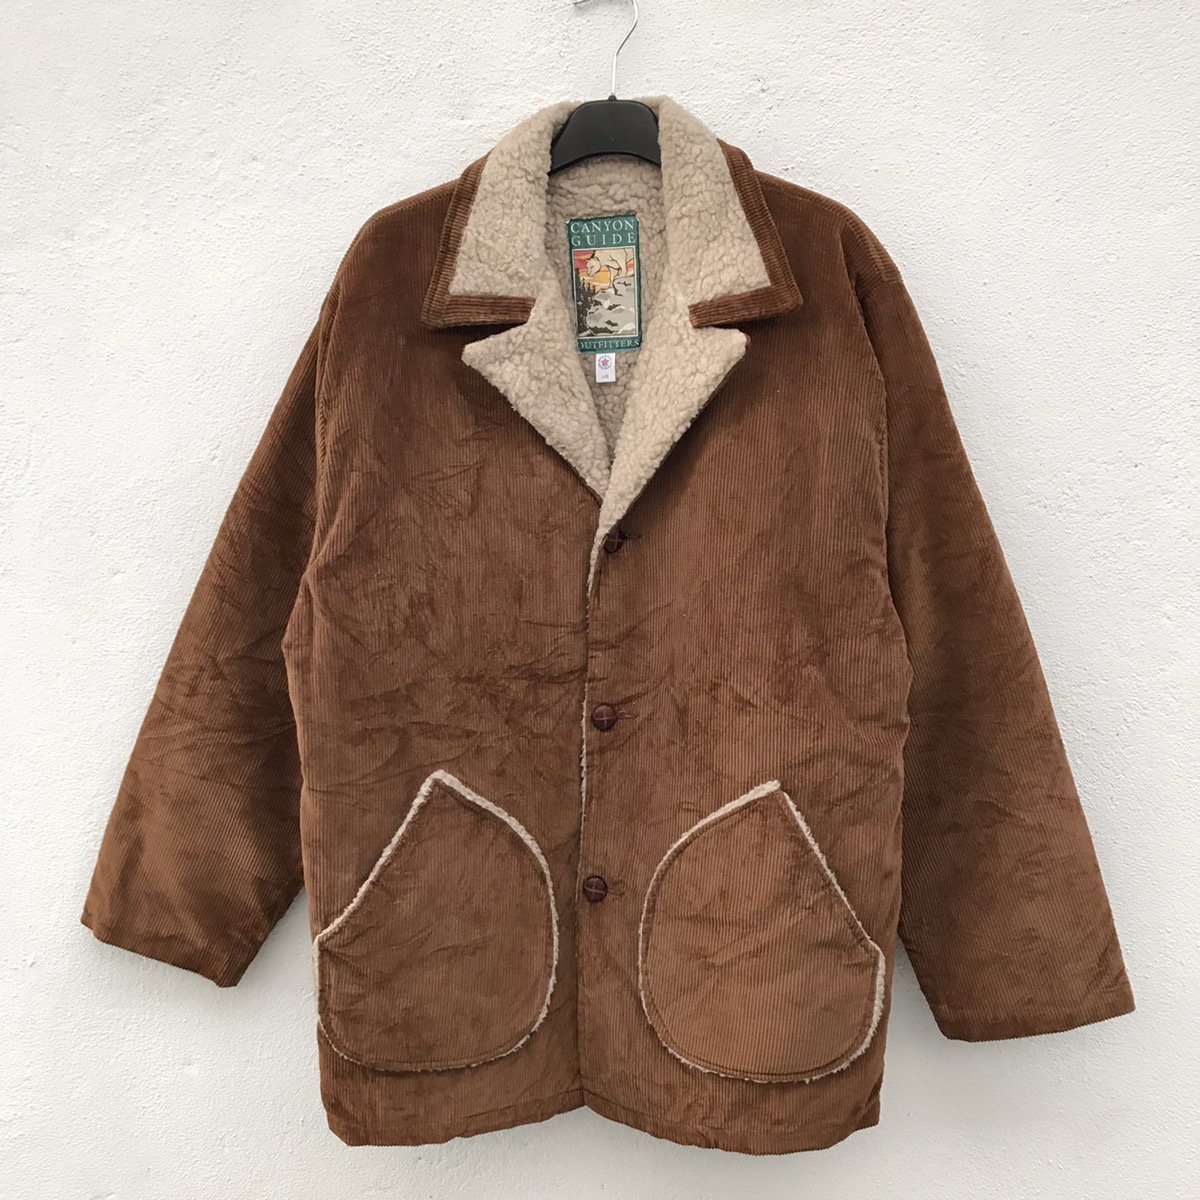 Vintage - Canyon Guide Outfitters Corduroy Jackets - 1